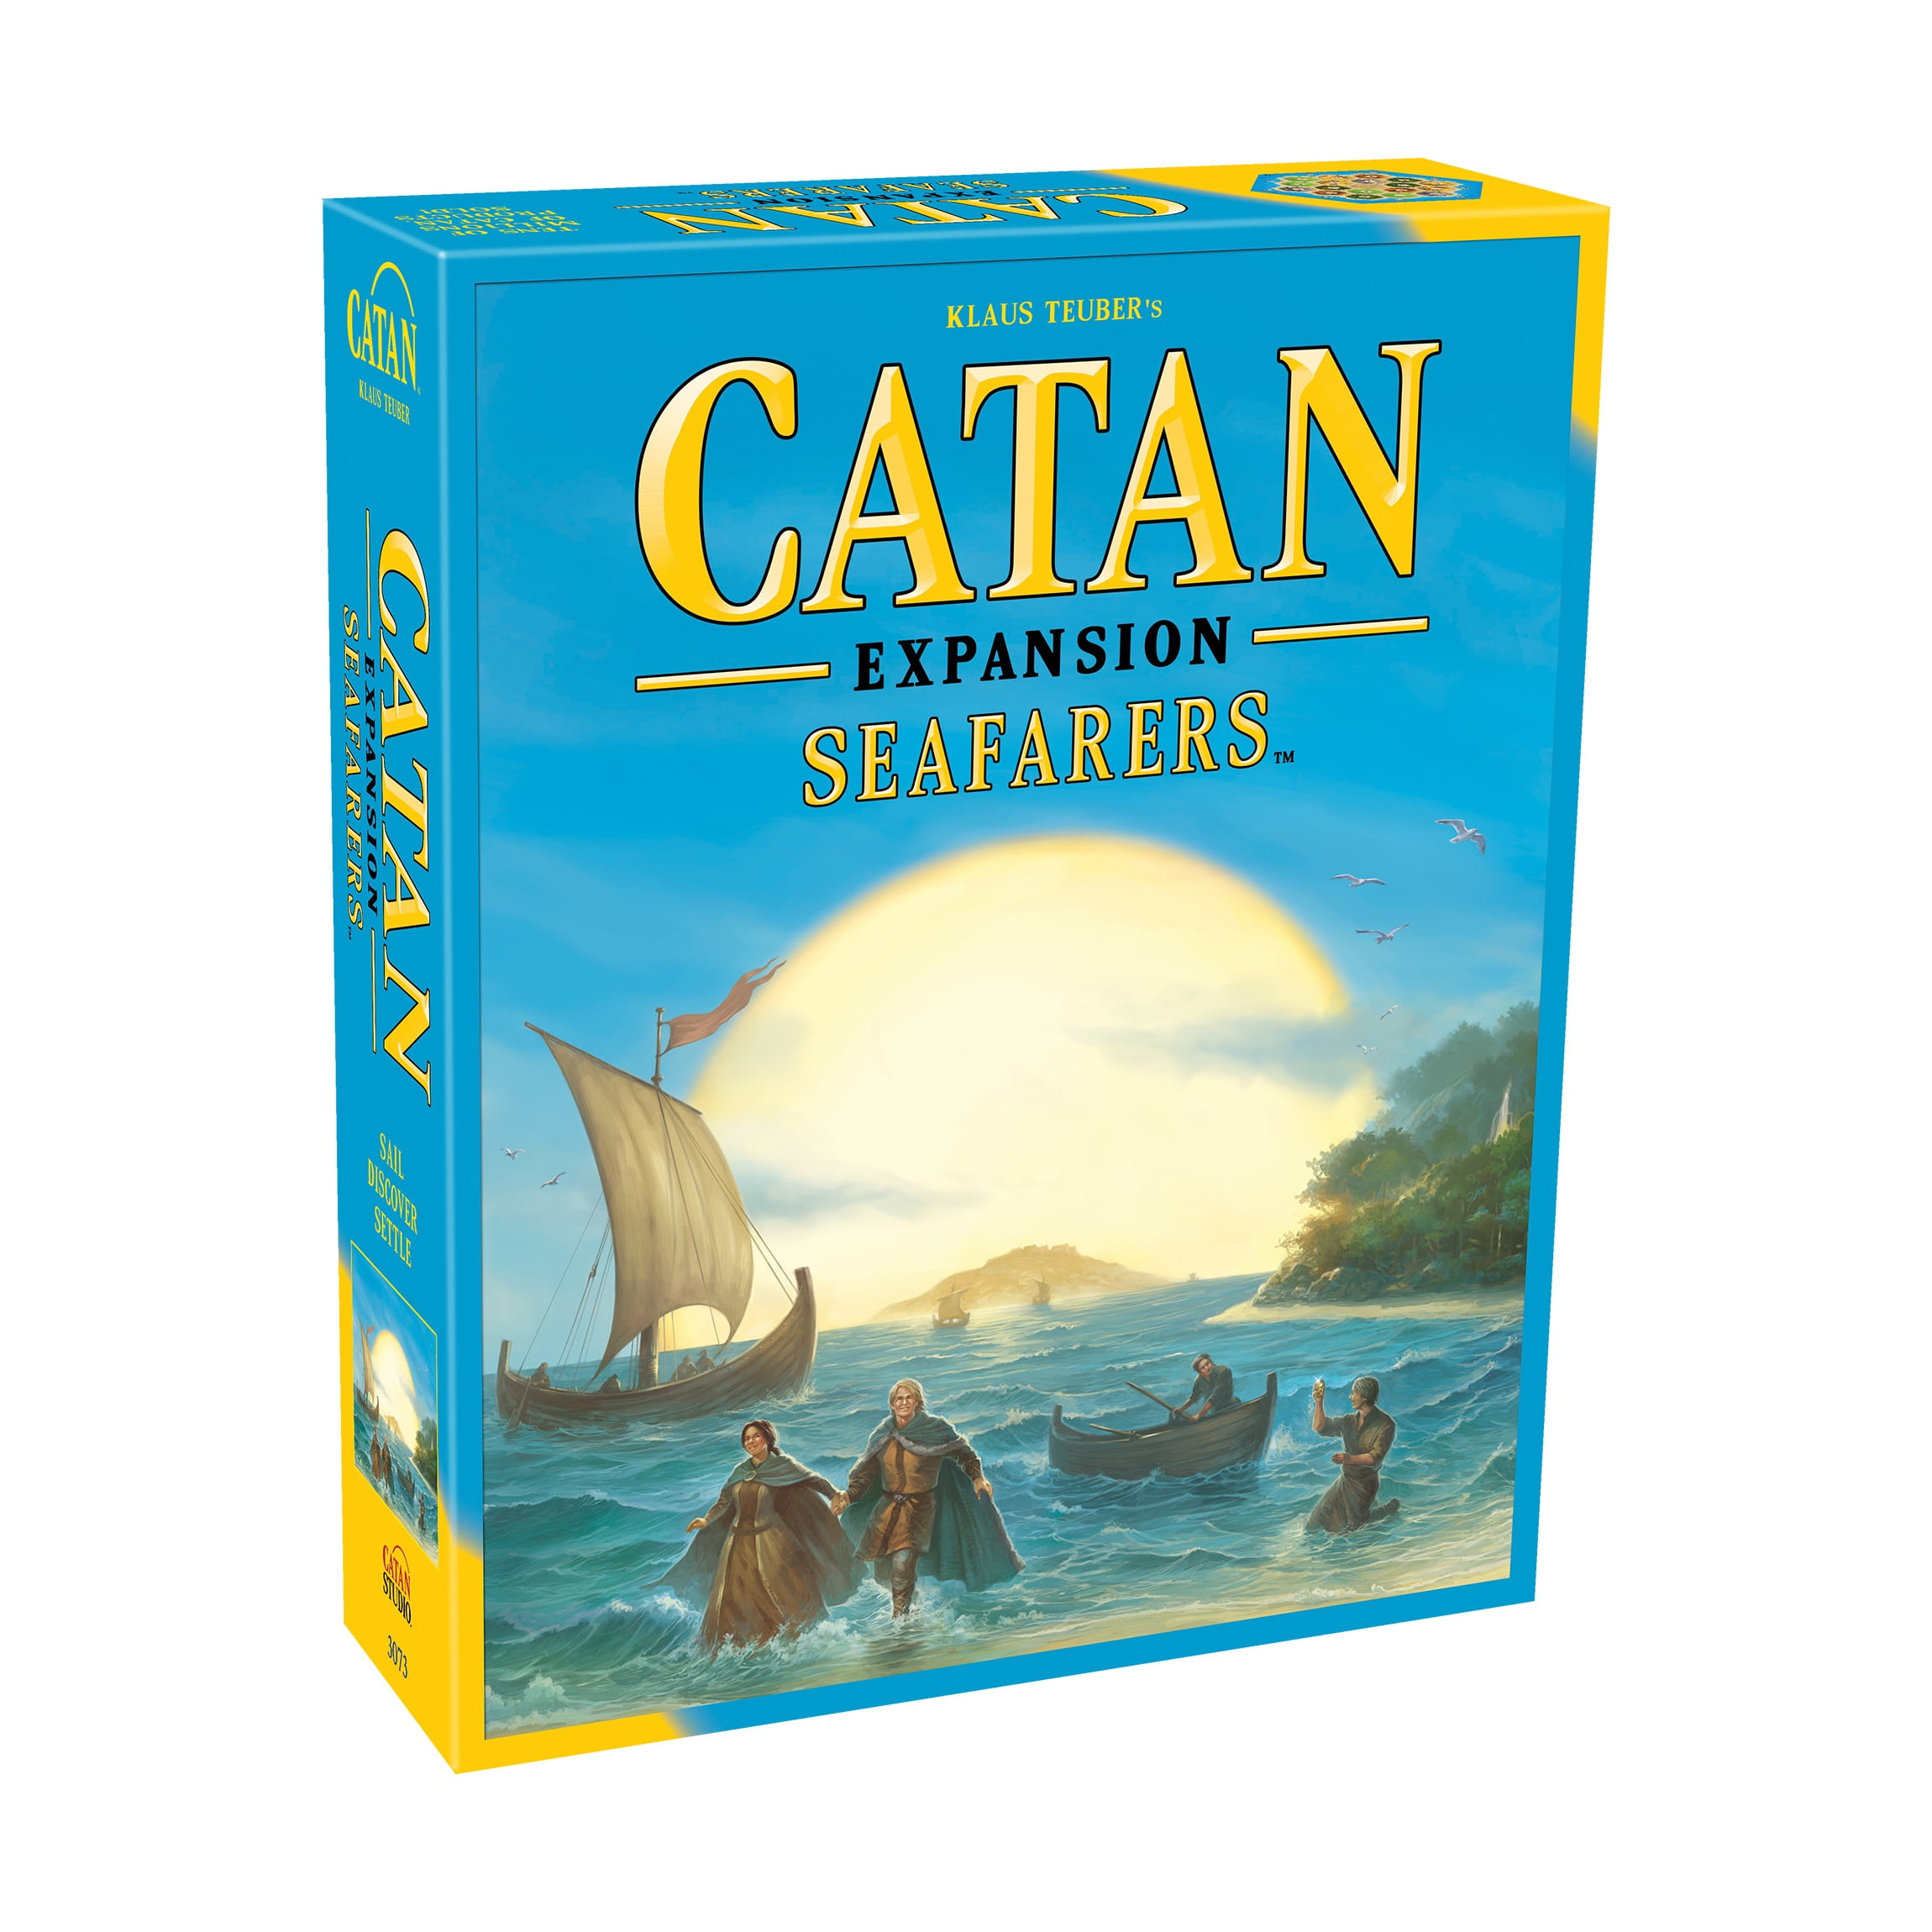 Settlers of Catan 5-6 Player Extension 5th Edition for sale online 